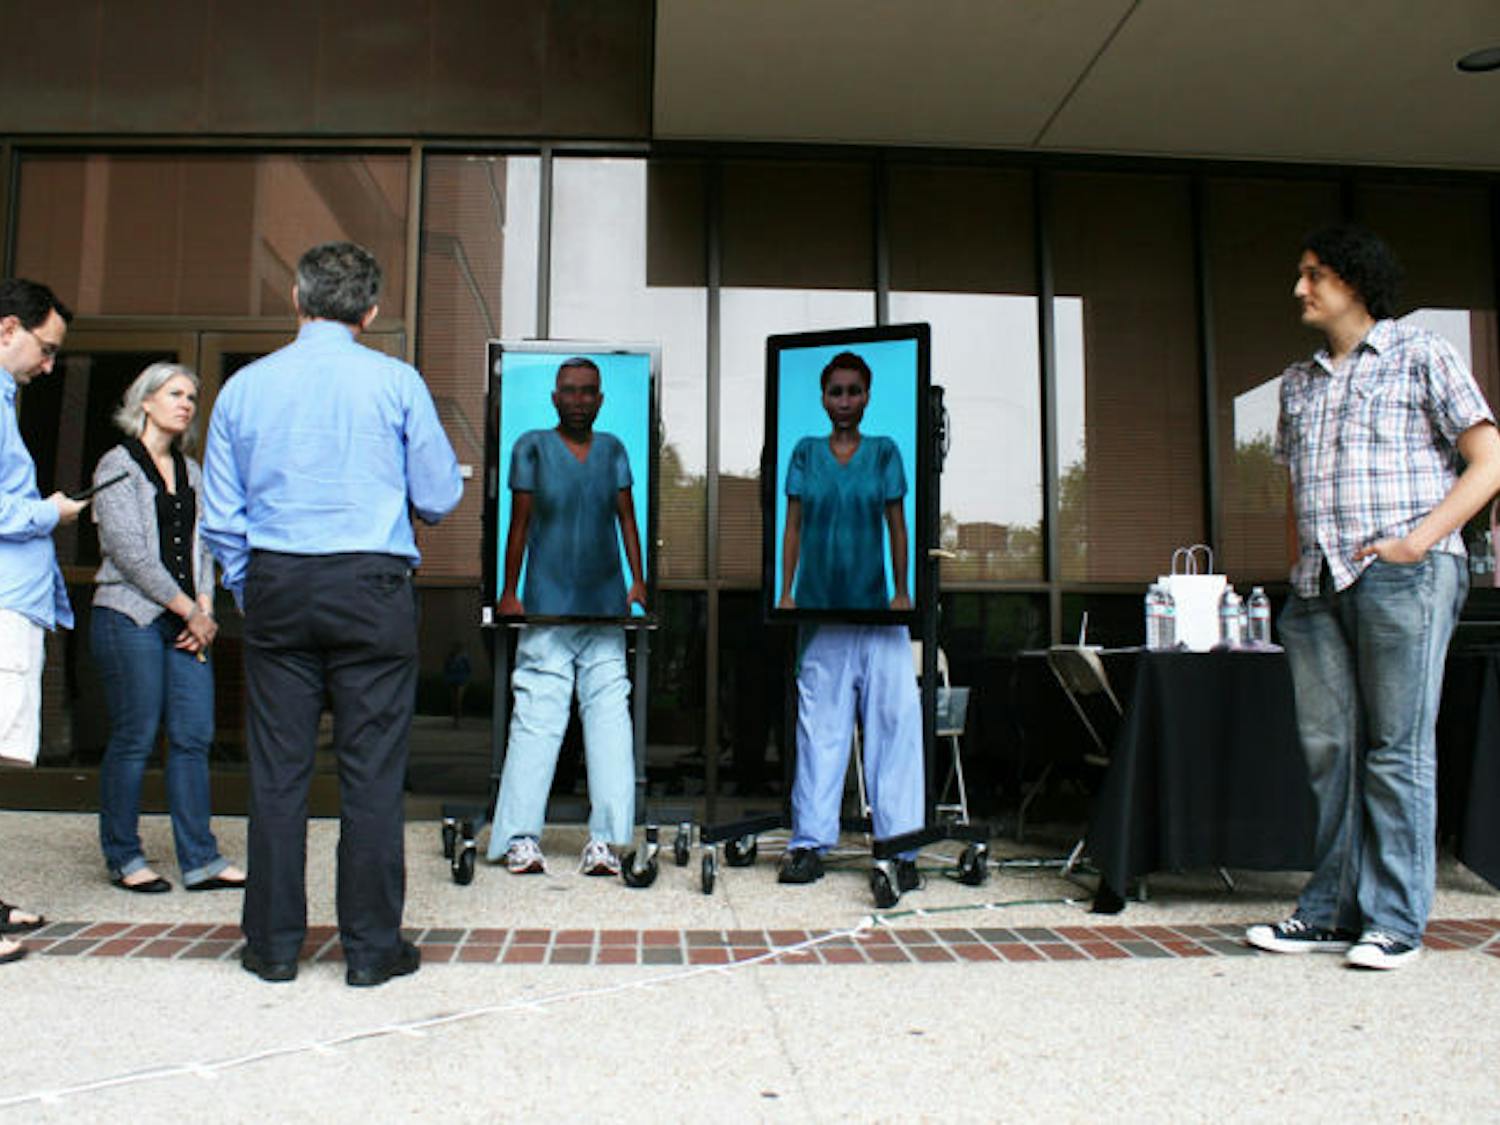 Andrew Robb, a 26-year-old UF Ph.D. student, far left, demonstrates to residents a computer project with “virtual humans,” designed to train people for interpersonal situations at the CISE Building on Monday.